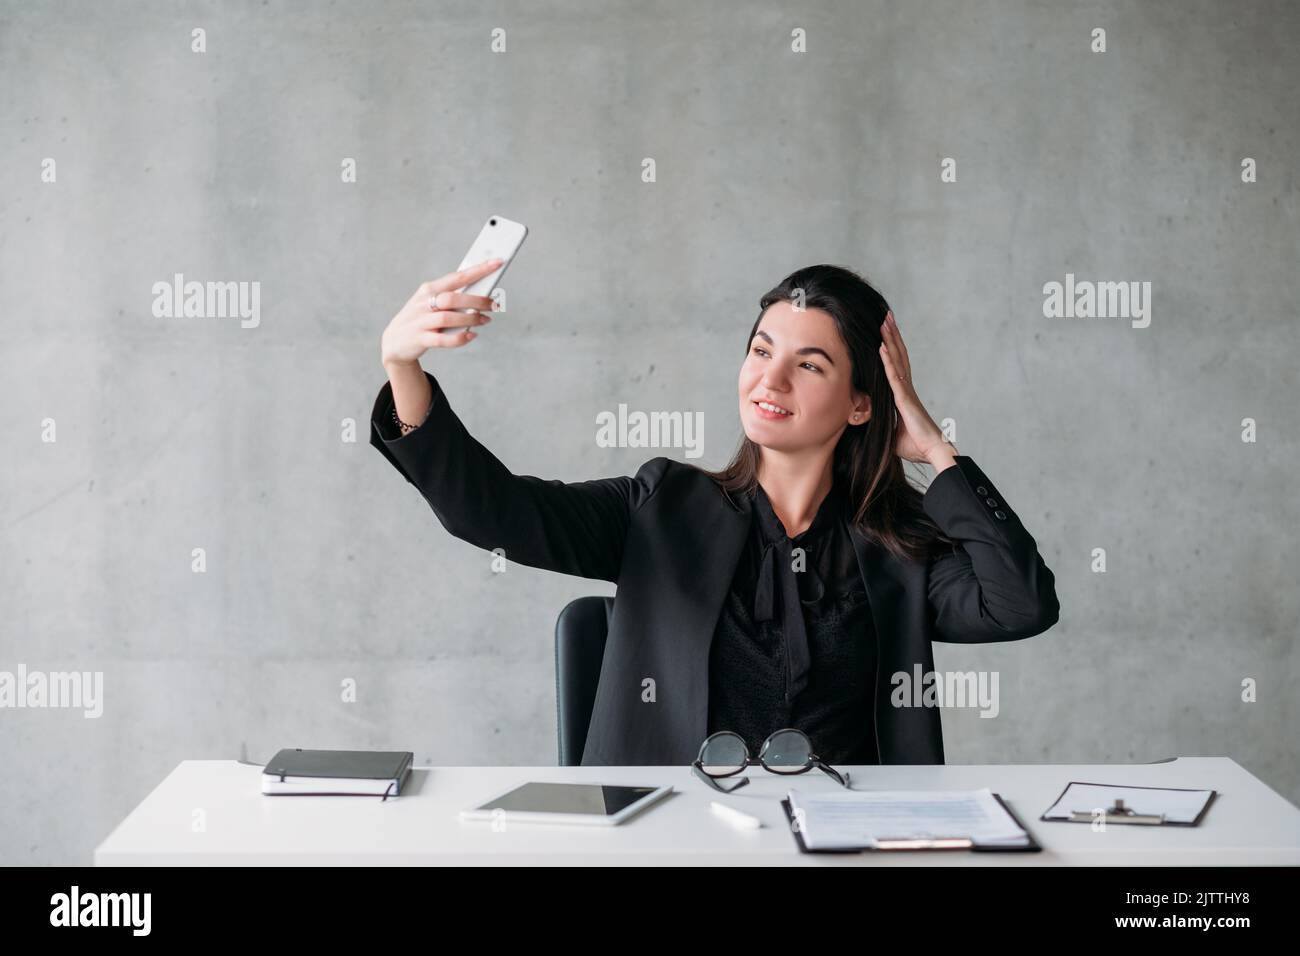 networking obsession narcistic business woman Stock Photo